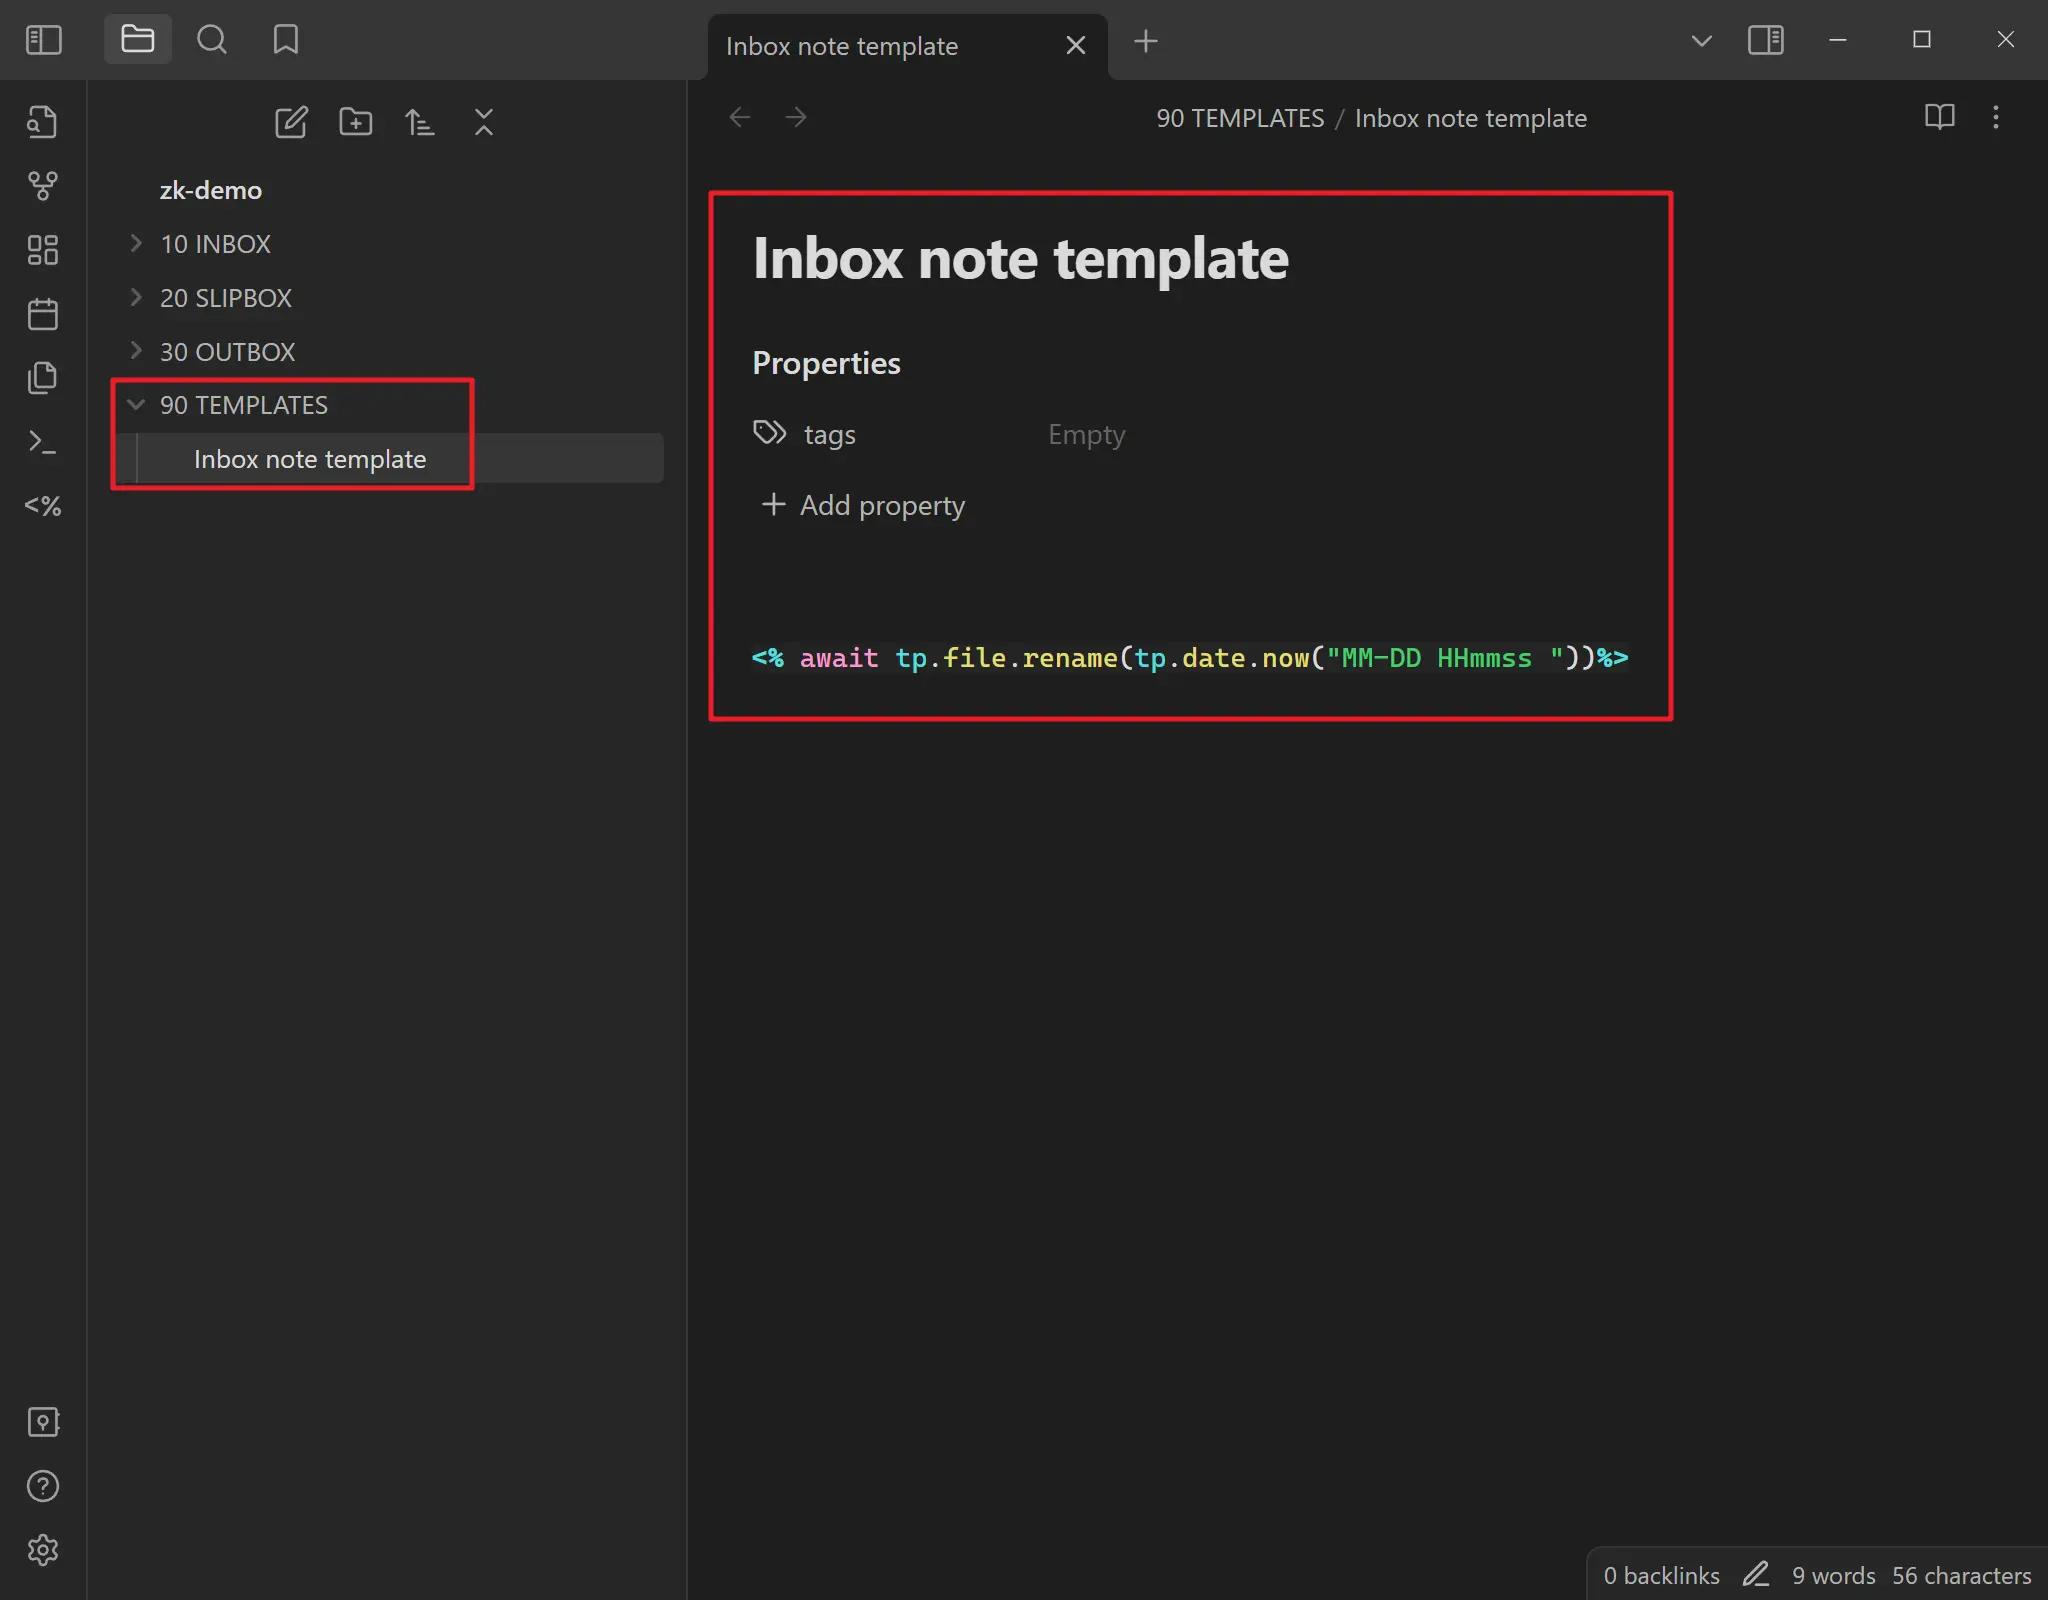 Inbox notes template